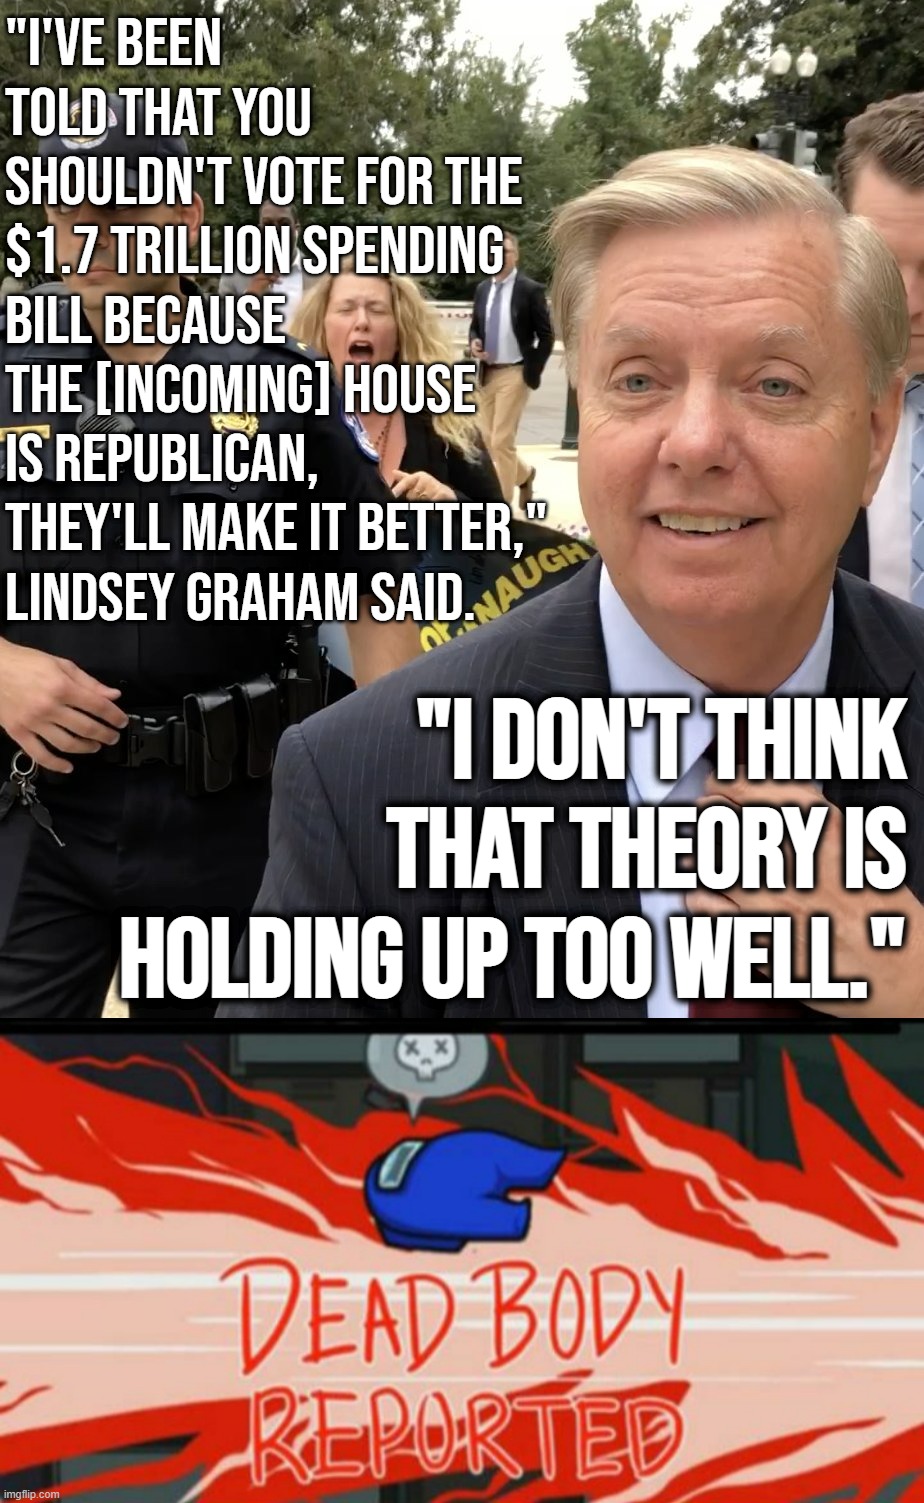 Lindsey Graham proving once again that no one roasts Republicans like another Republican XD | "I'VE BEEN TOLD THAT YOU SHOULDN'T VOTE FOR THE $1.7 TRILLION SPENDING BILL BECAUSE THE [INCOMING] HOUSE IS REPUBLICAN, THEY'LL MAKE IT BETTER," LINDSEY GRAHAM SAID. "I DON'T THINK THAT THEORY IS HOLDING UP TOO WELL." | image tagged in lindsey graham thug life,dead body reported,republicans,gop,republican party,congress | made w/ Imgflip meme maker